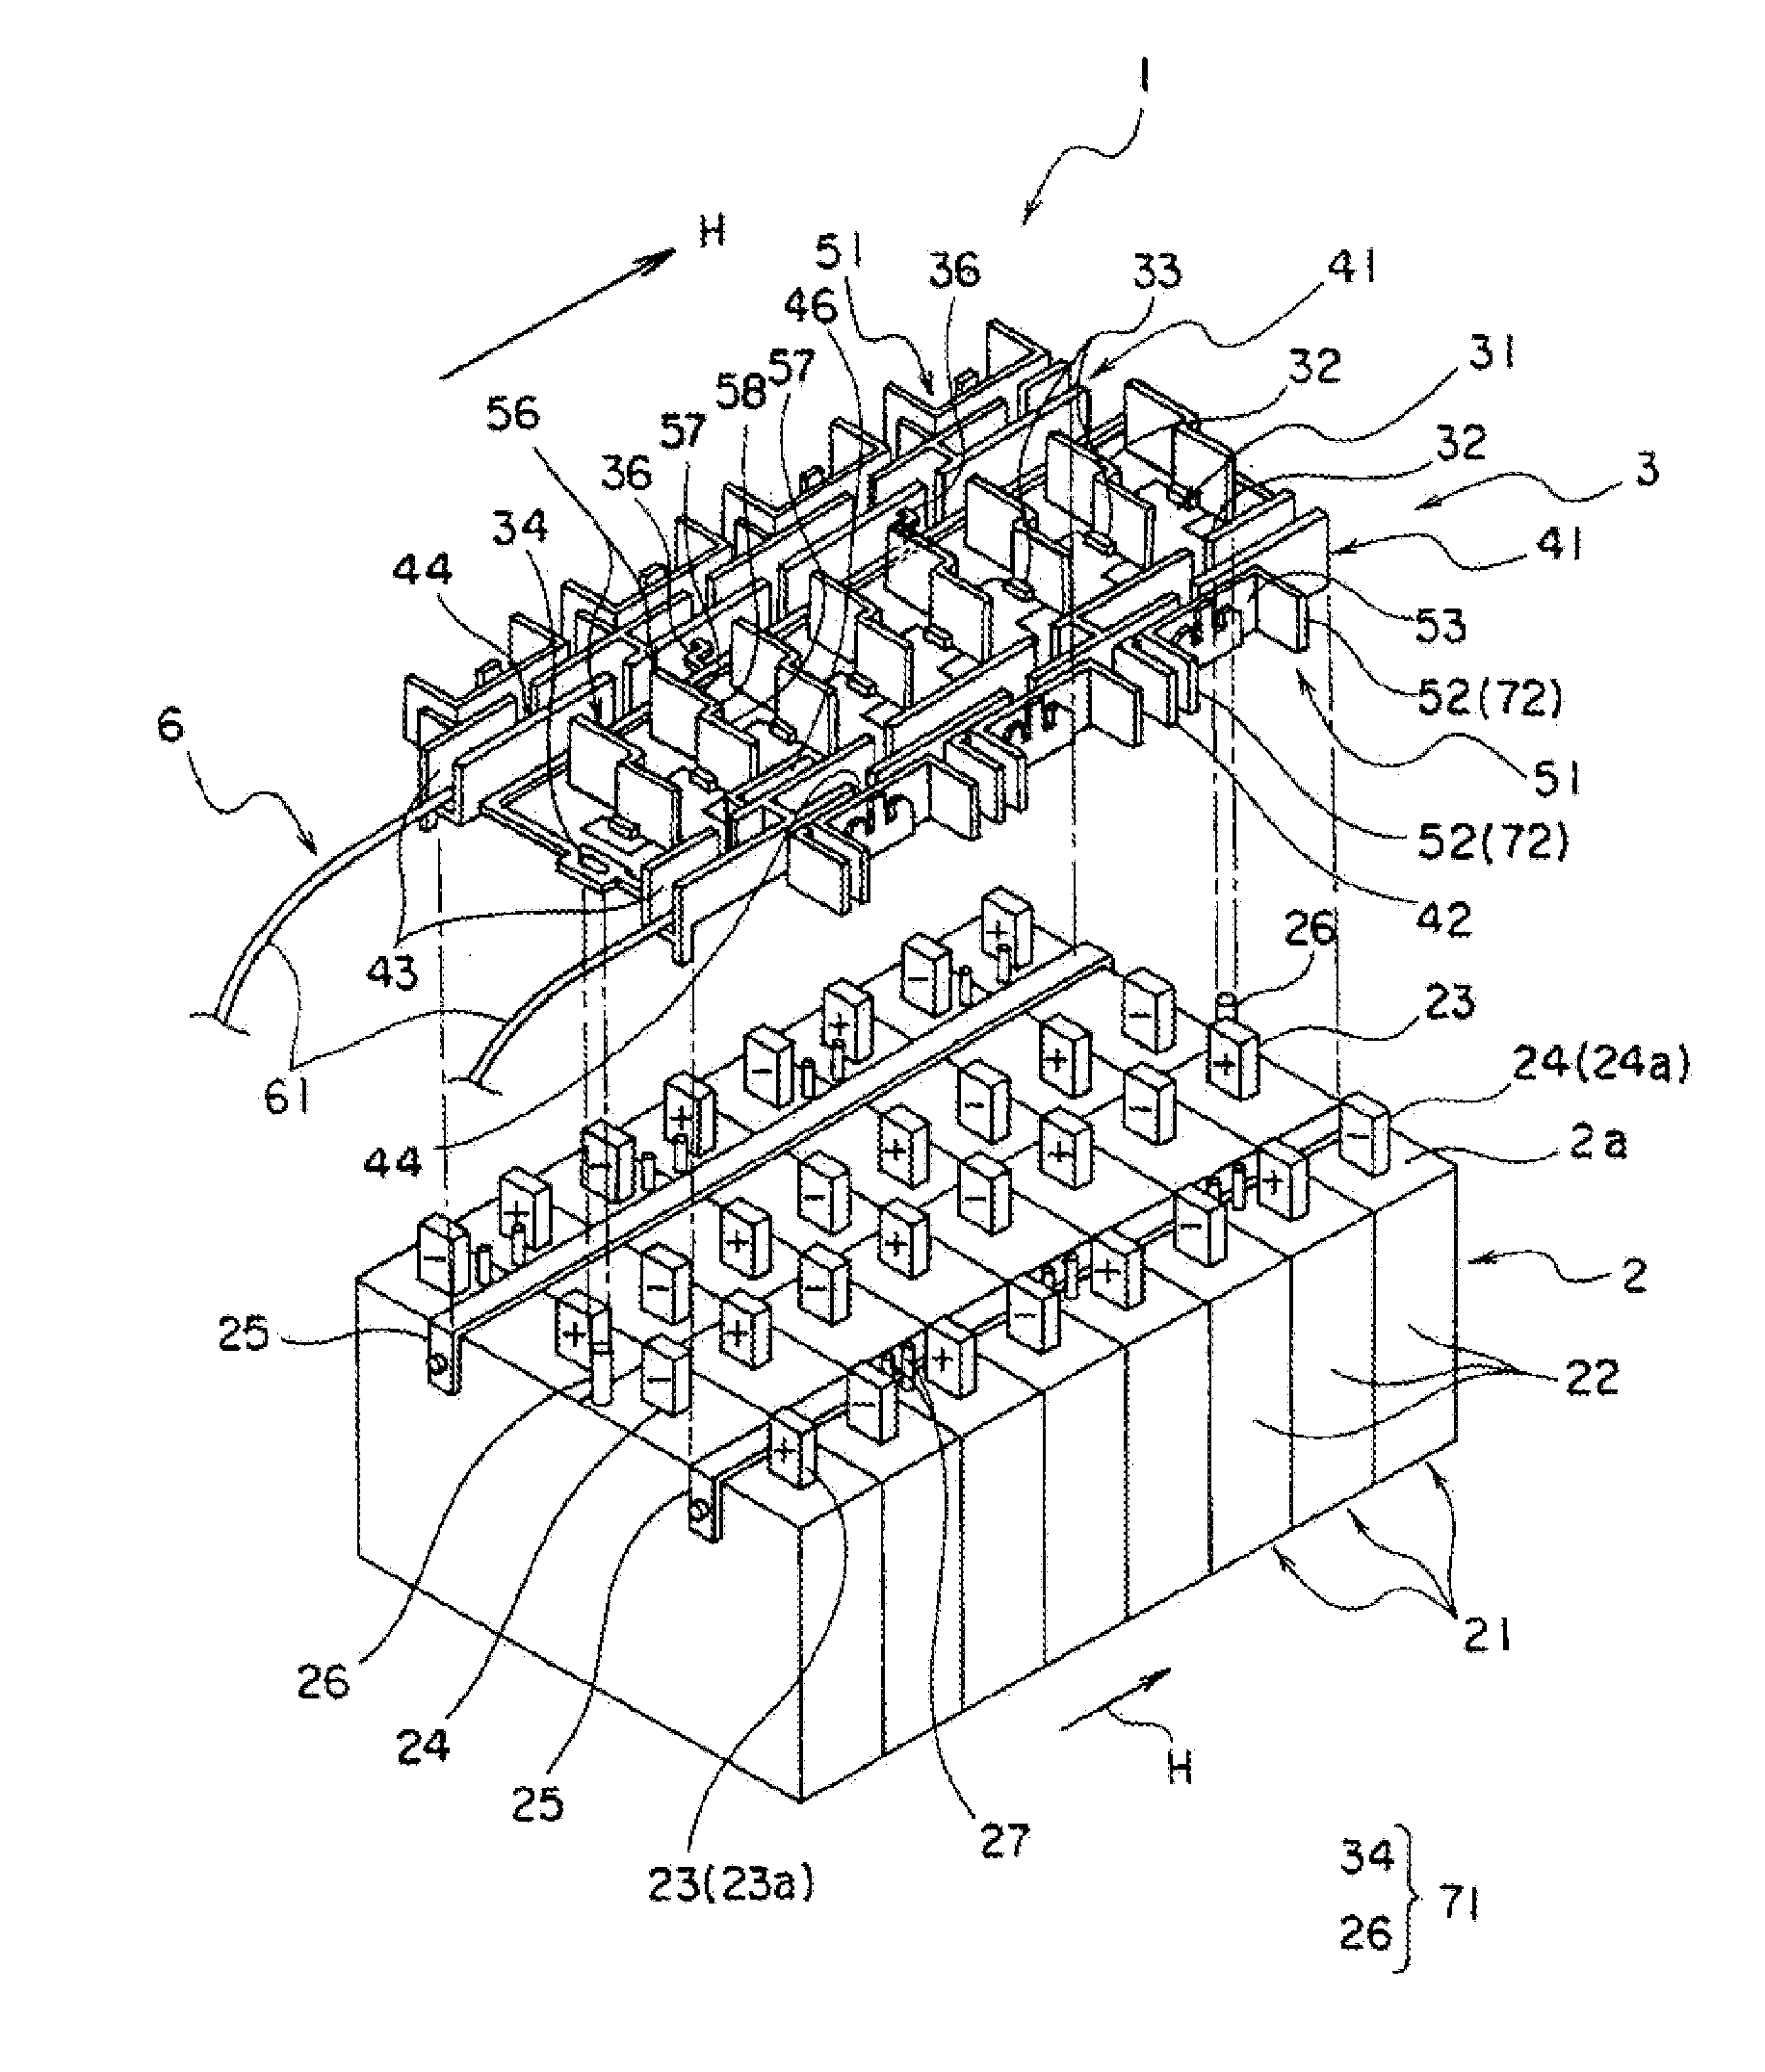 Power supply device